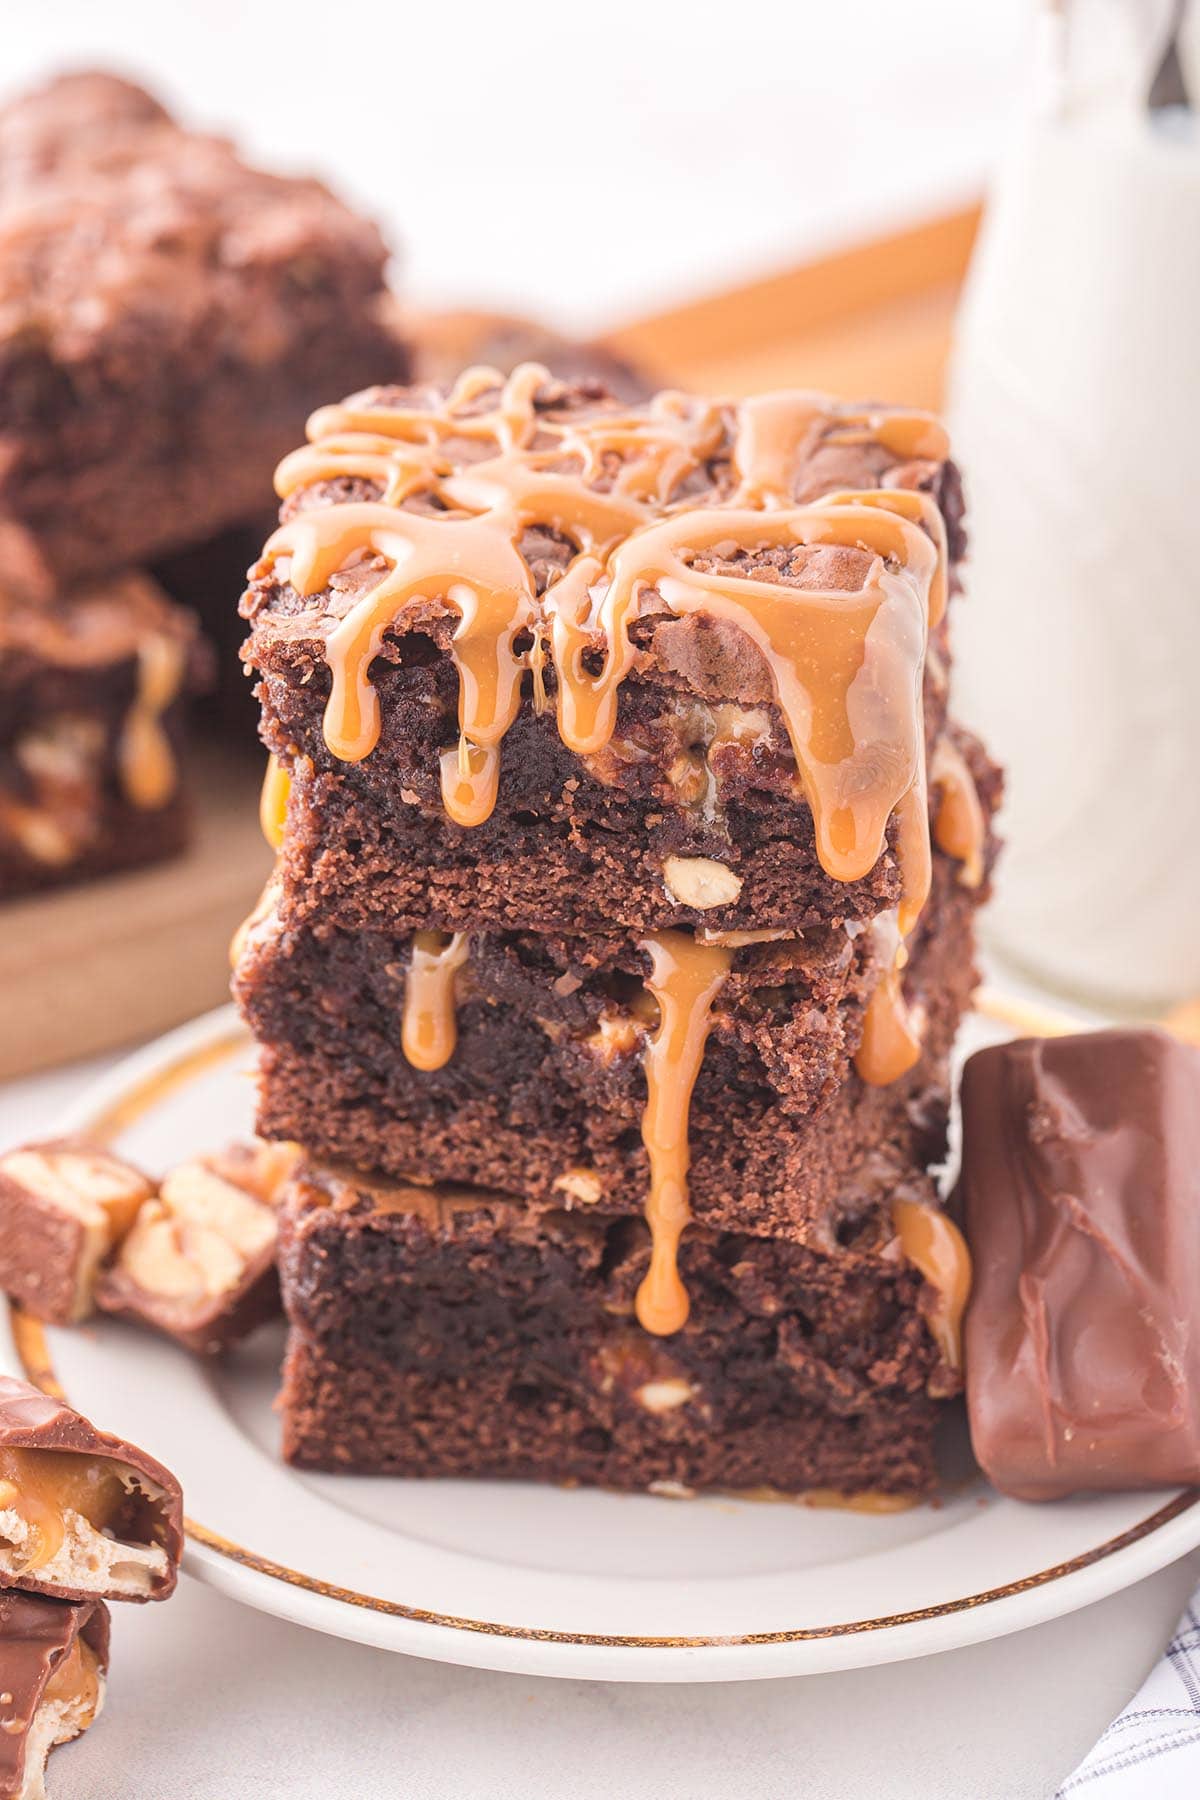 Snickers Brownie drizzled with caramel sauce on top.